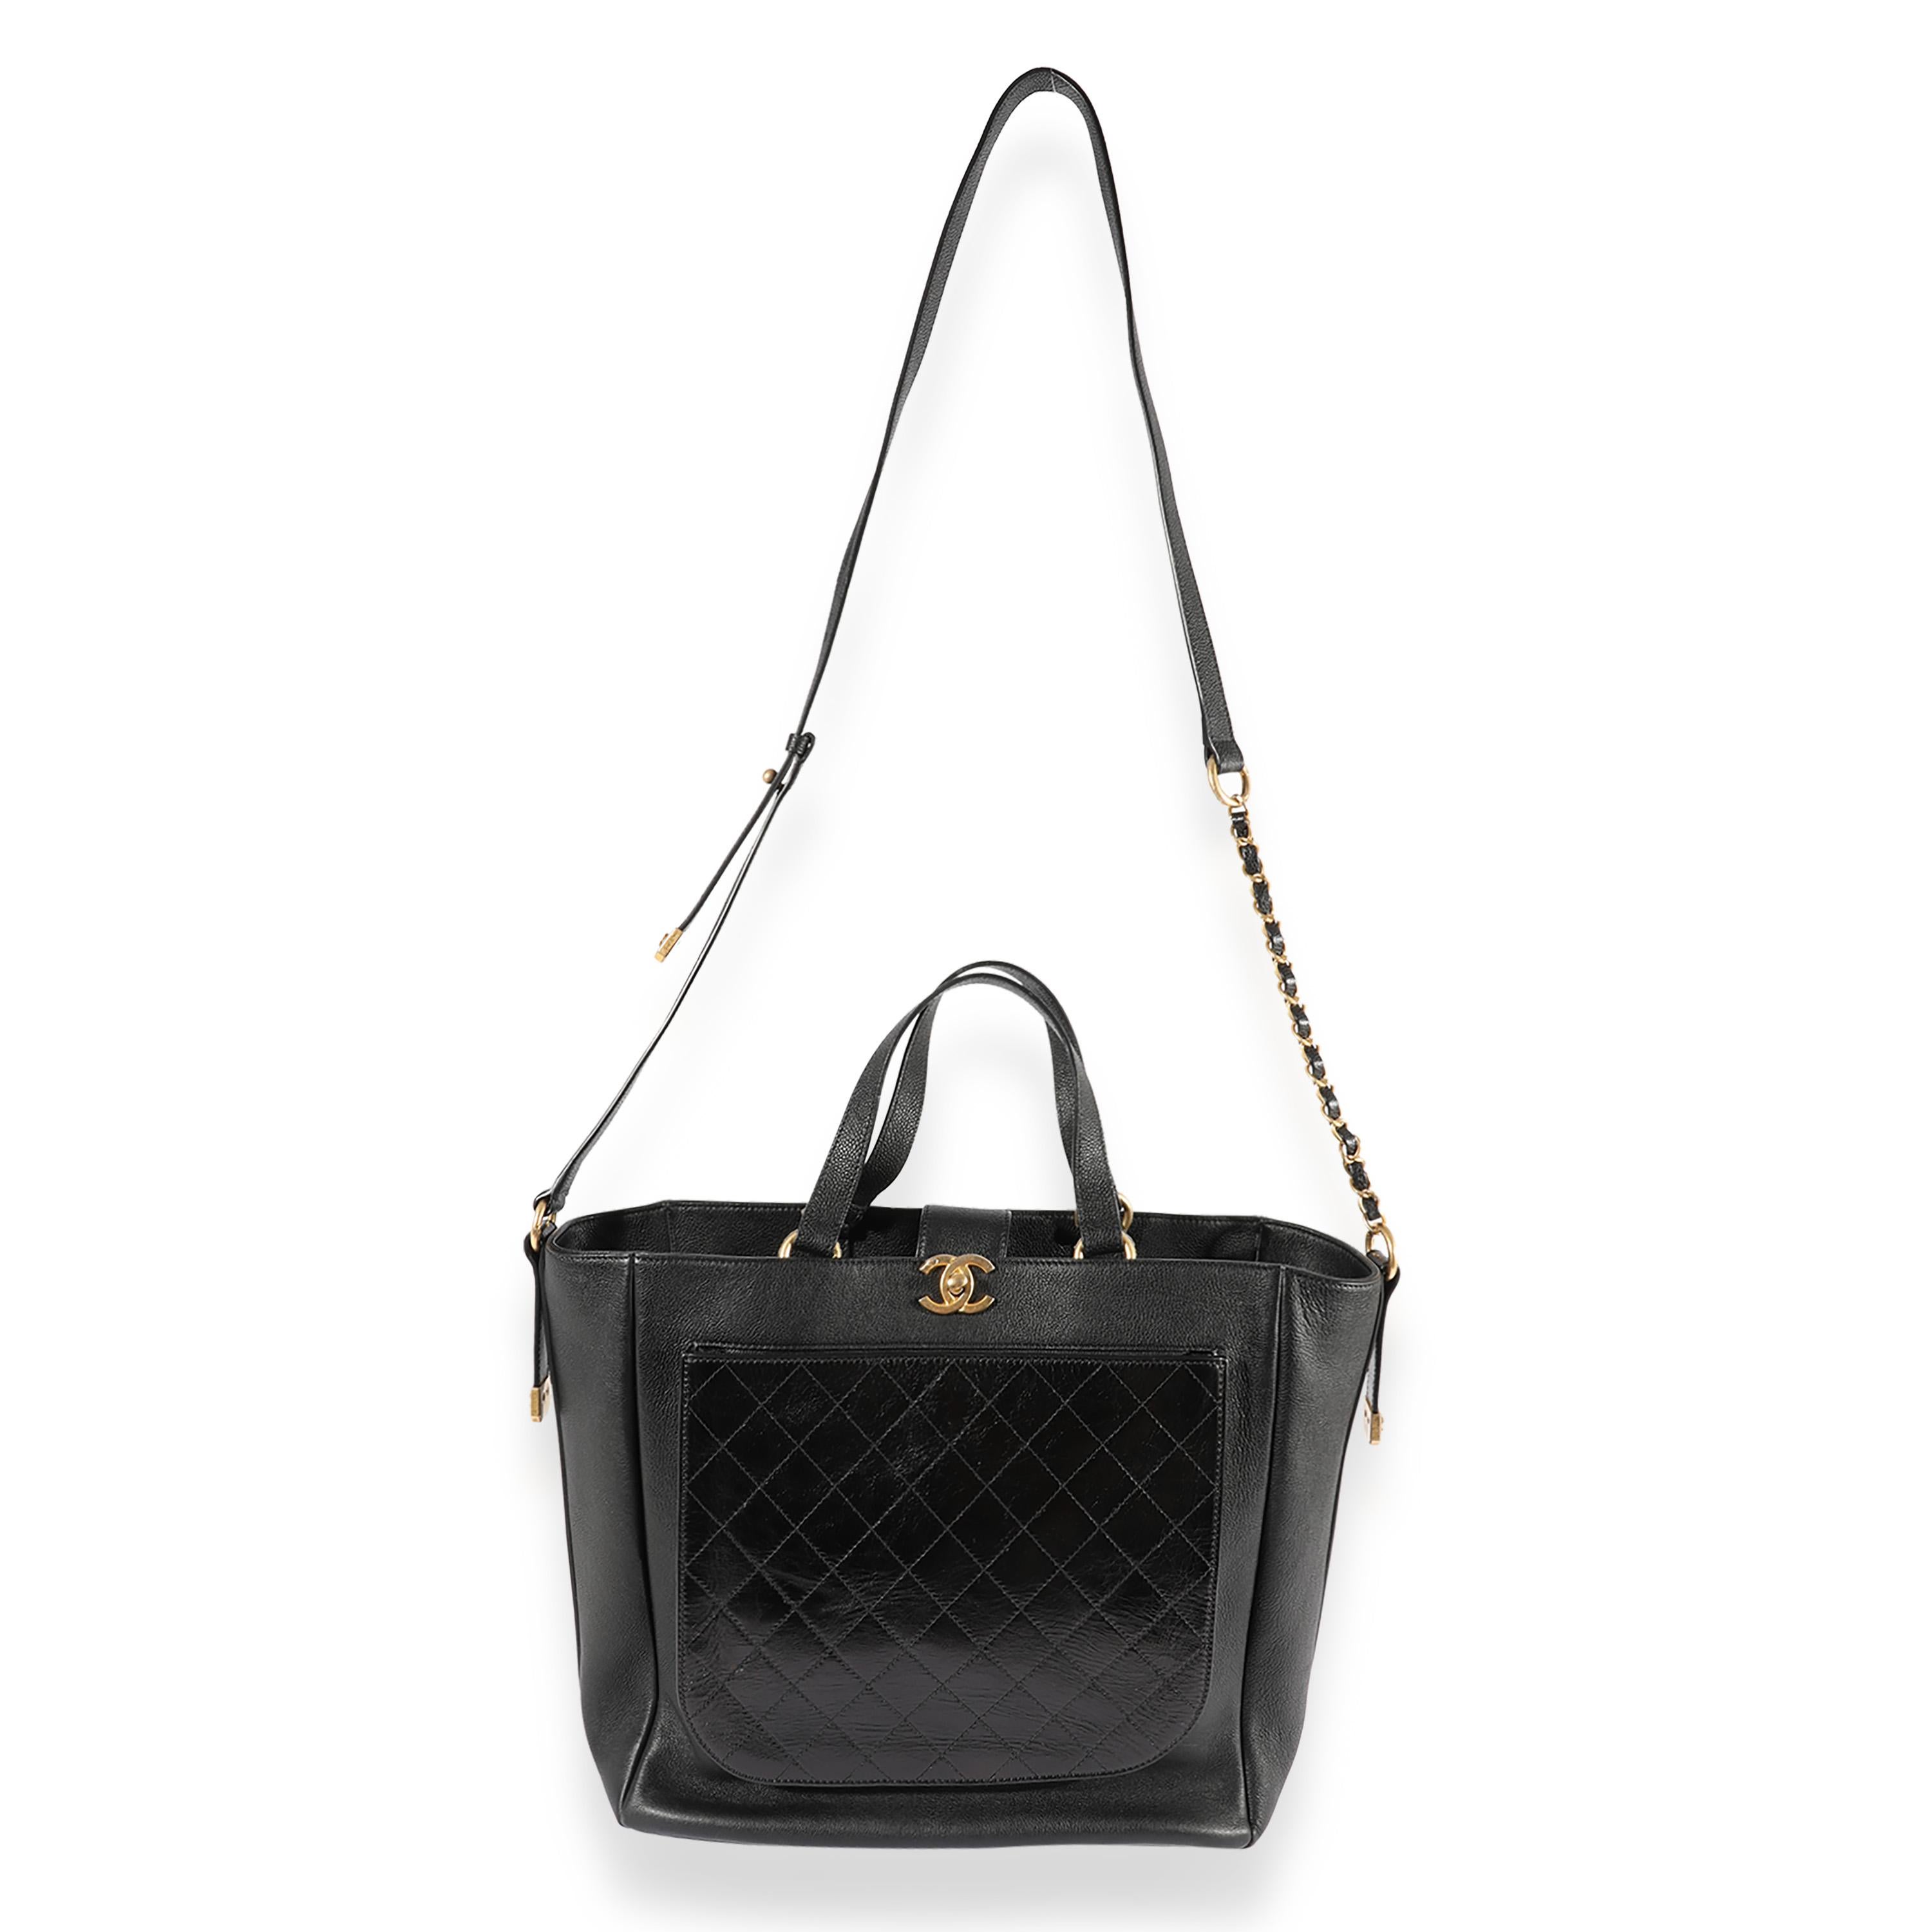 Listing Title: Chanel Black Quilted Calfskin Shopping Tote
SKU: 123011
Condition: Pre-owned 
Handbag Condition: Very Good
Condition Comments: Very Good Condition. Plastic at some hardware. Light scuffing at corners and throughout exterior. Light